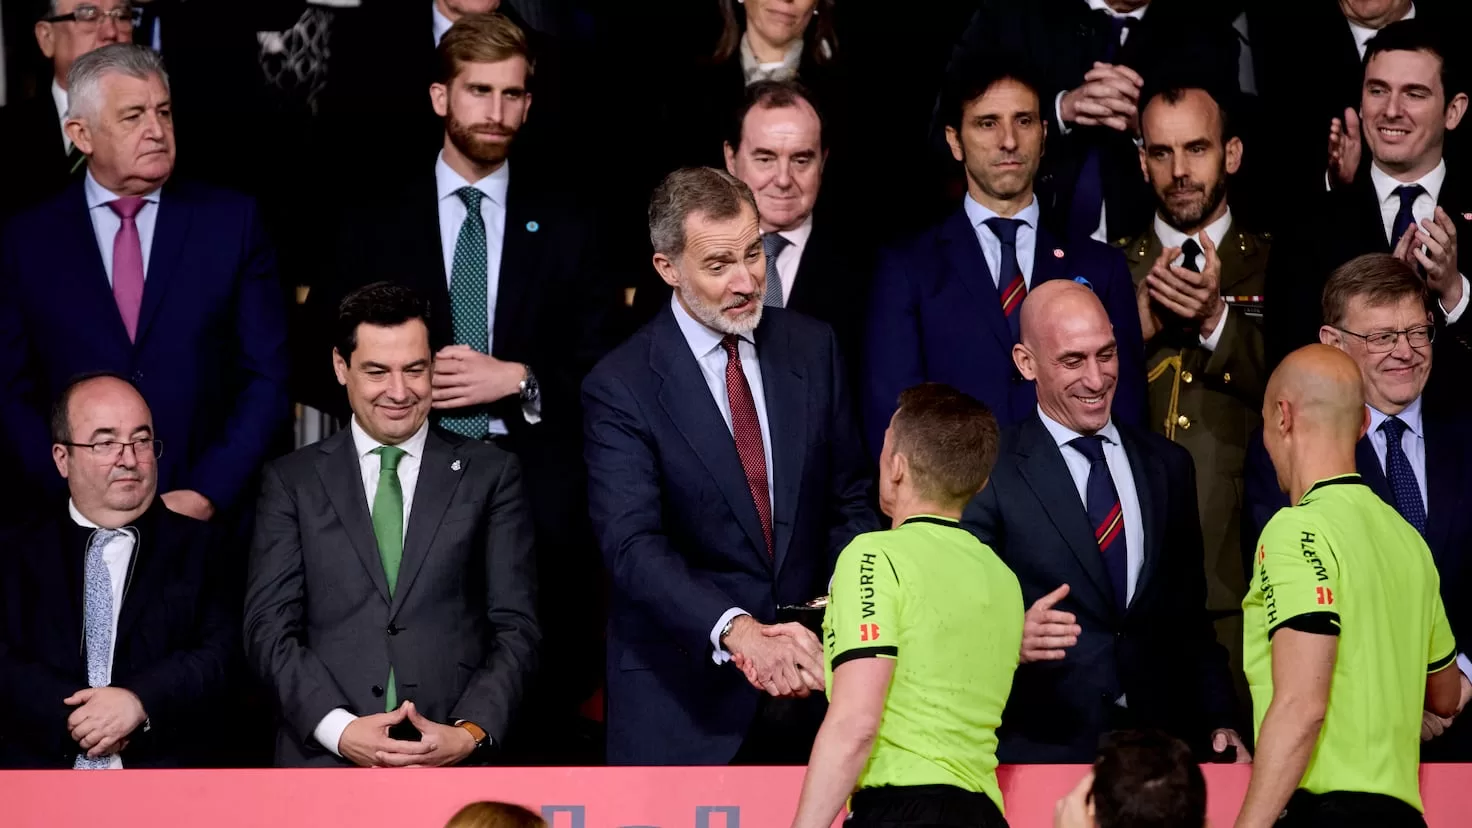 What football team does King Felipe VI belong to and what is known about his football tastes?
